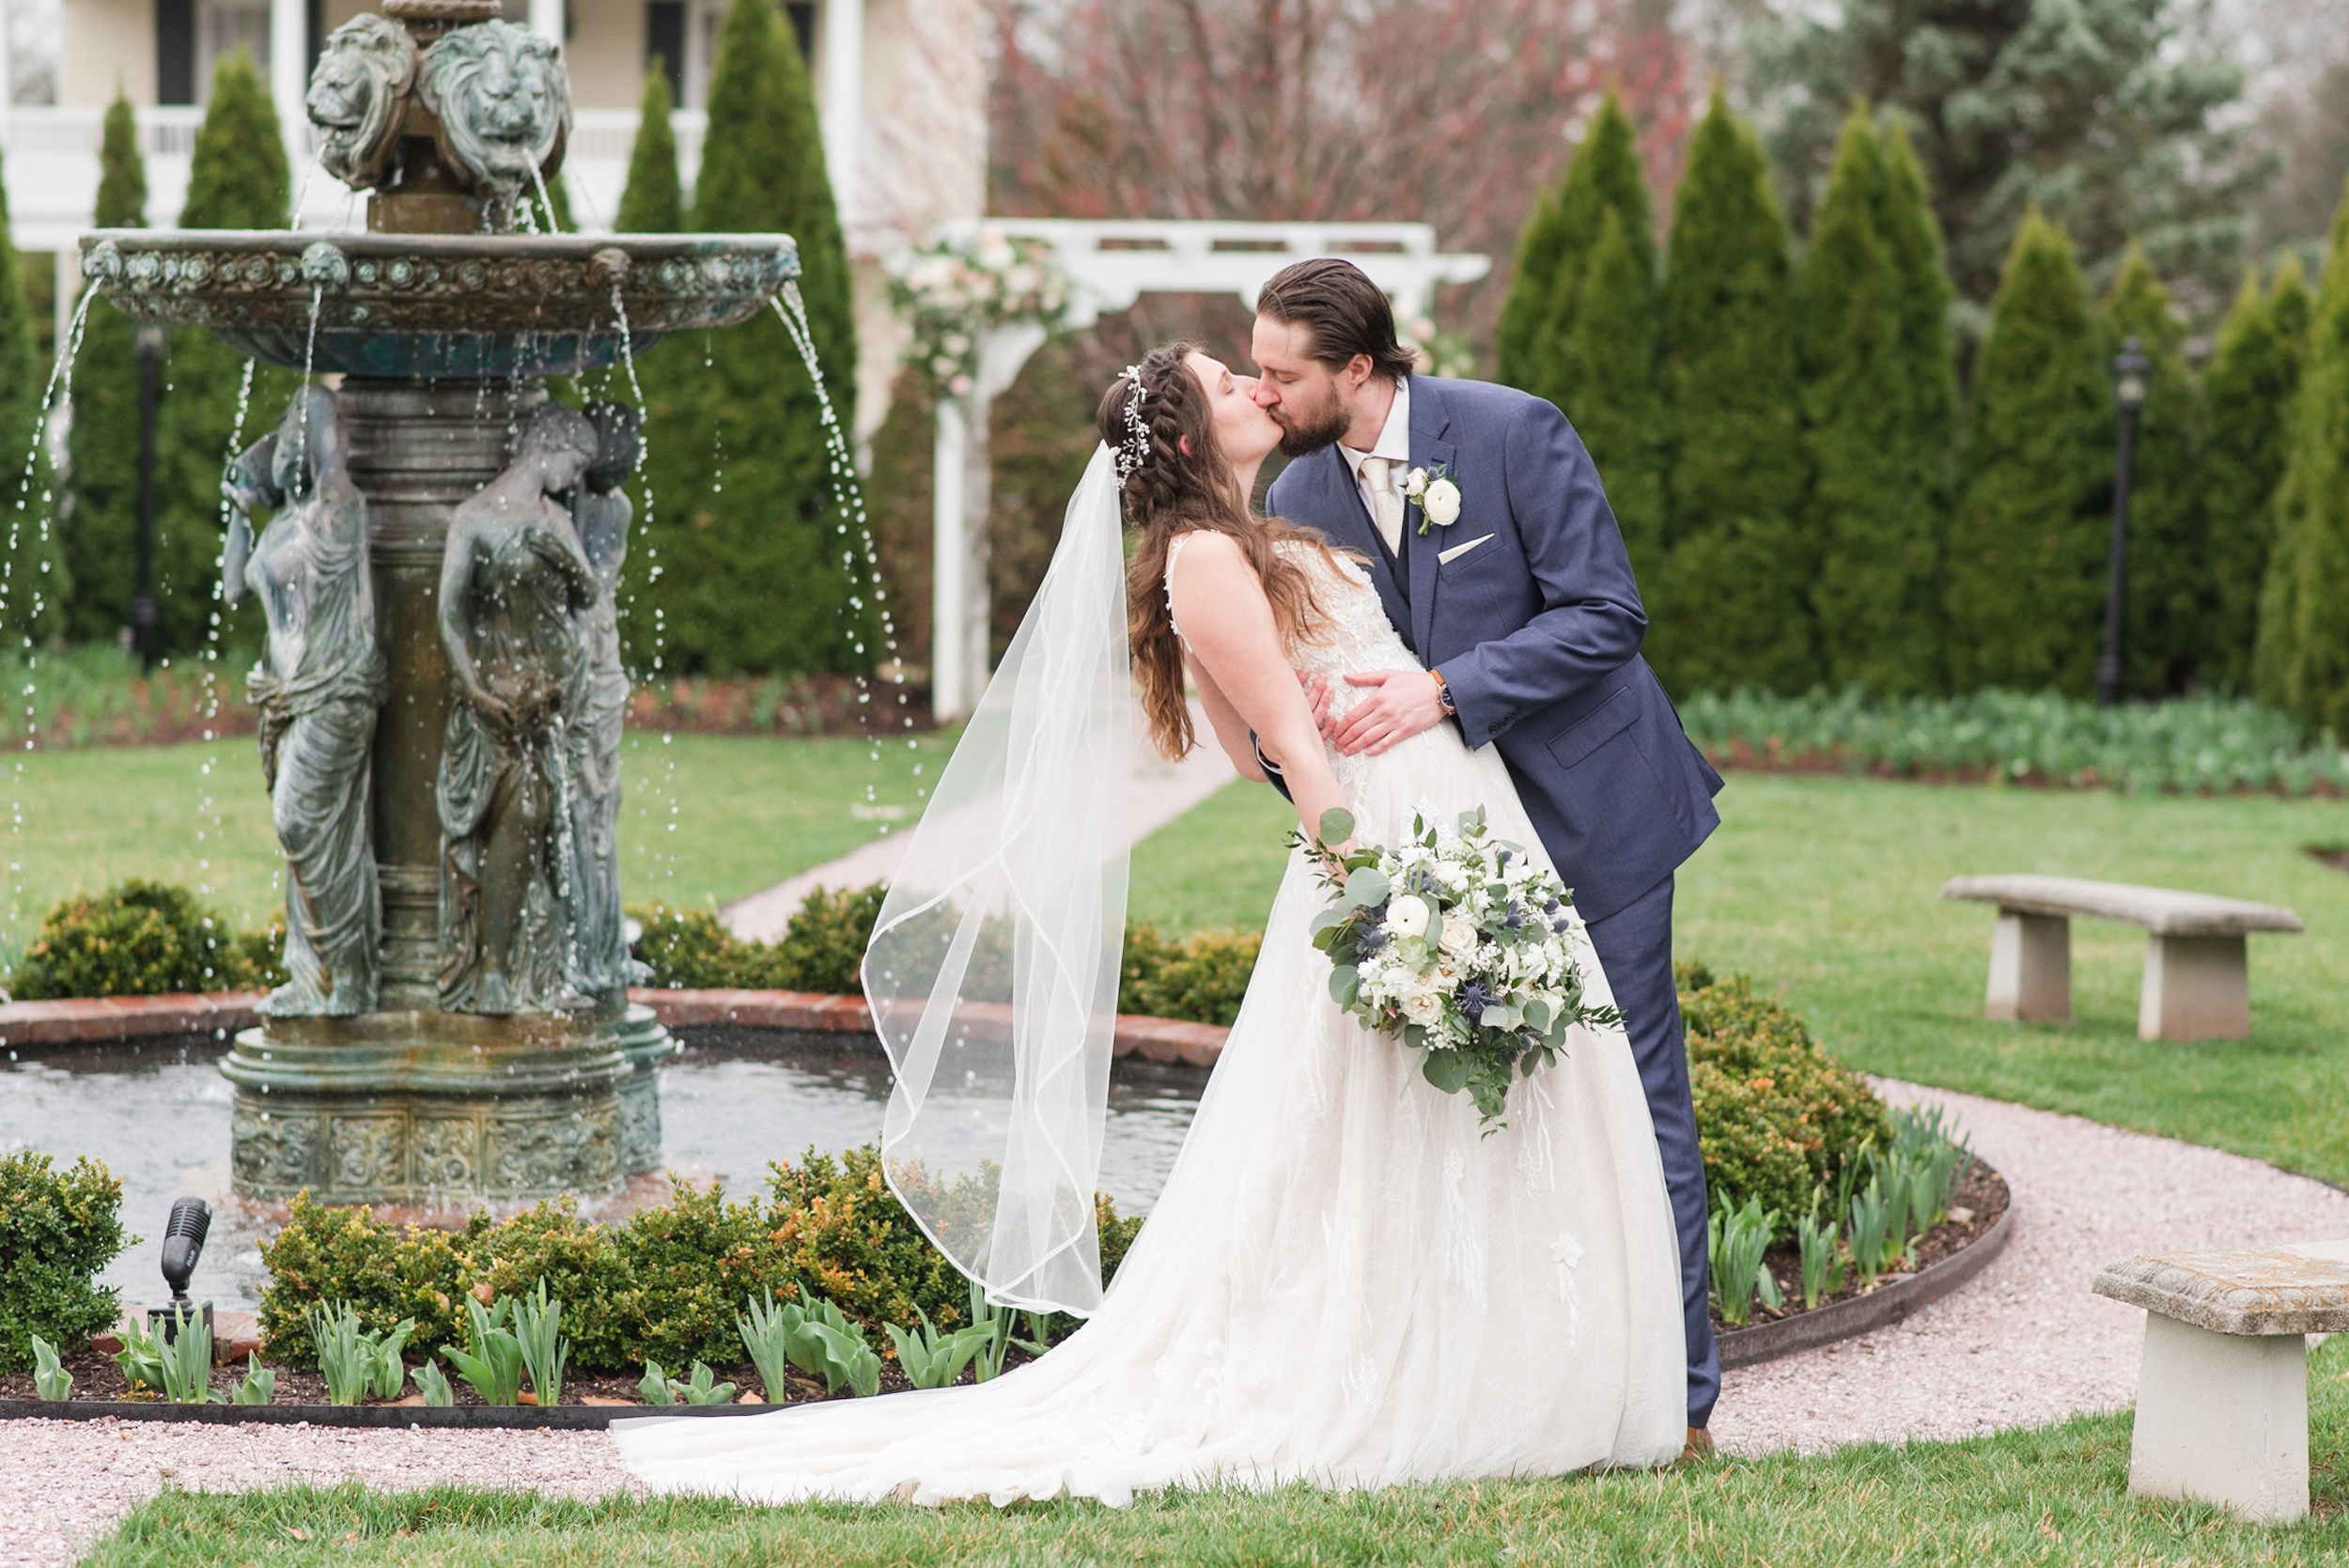 Newlyweds kiss in the gardens by the fountains at their Antrim 1844 Wedding